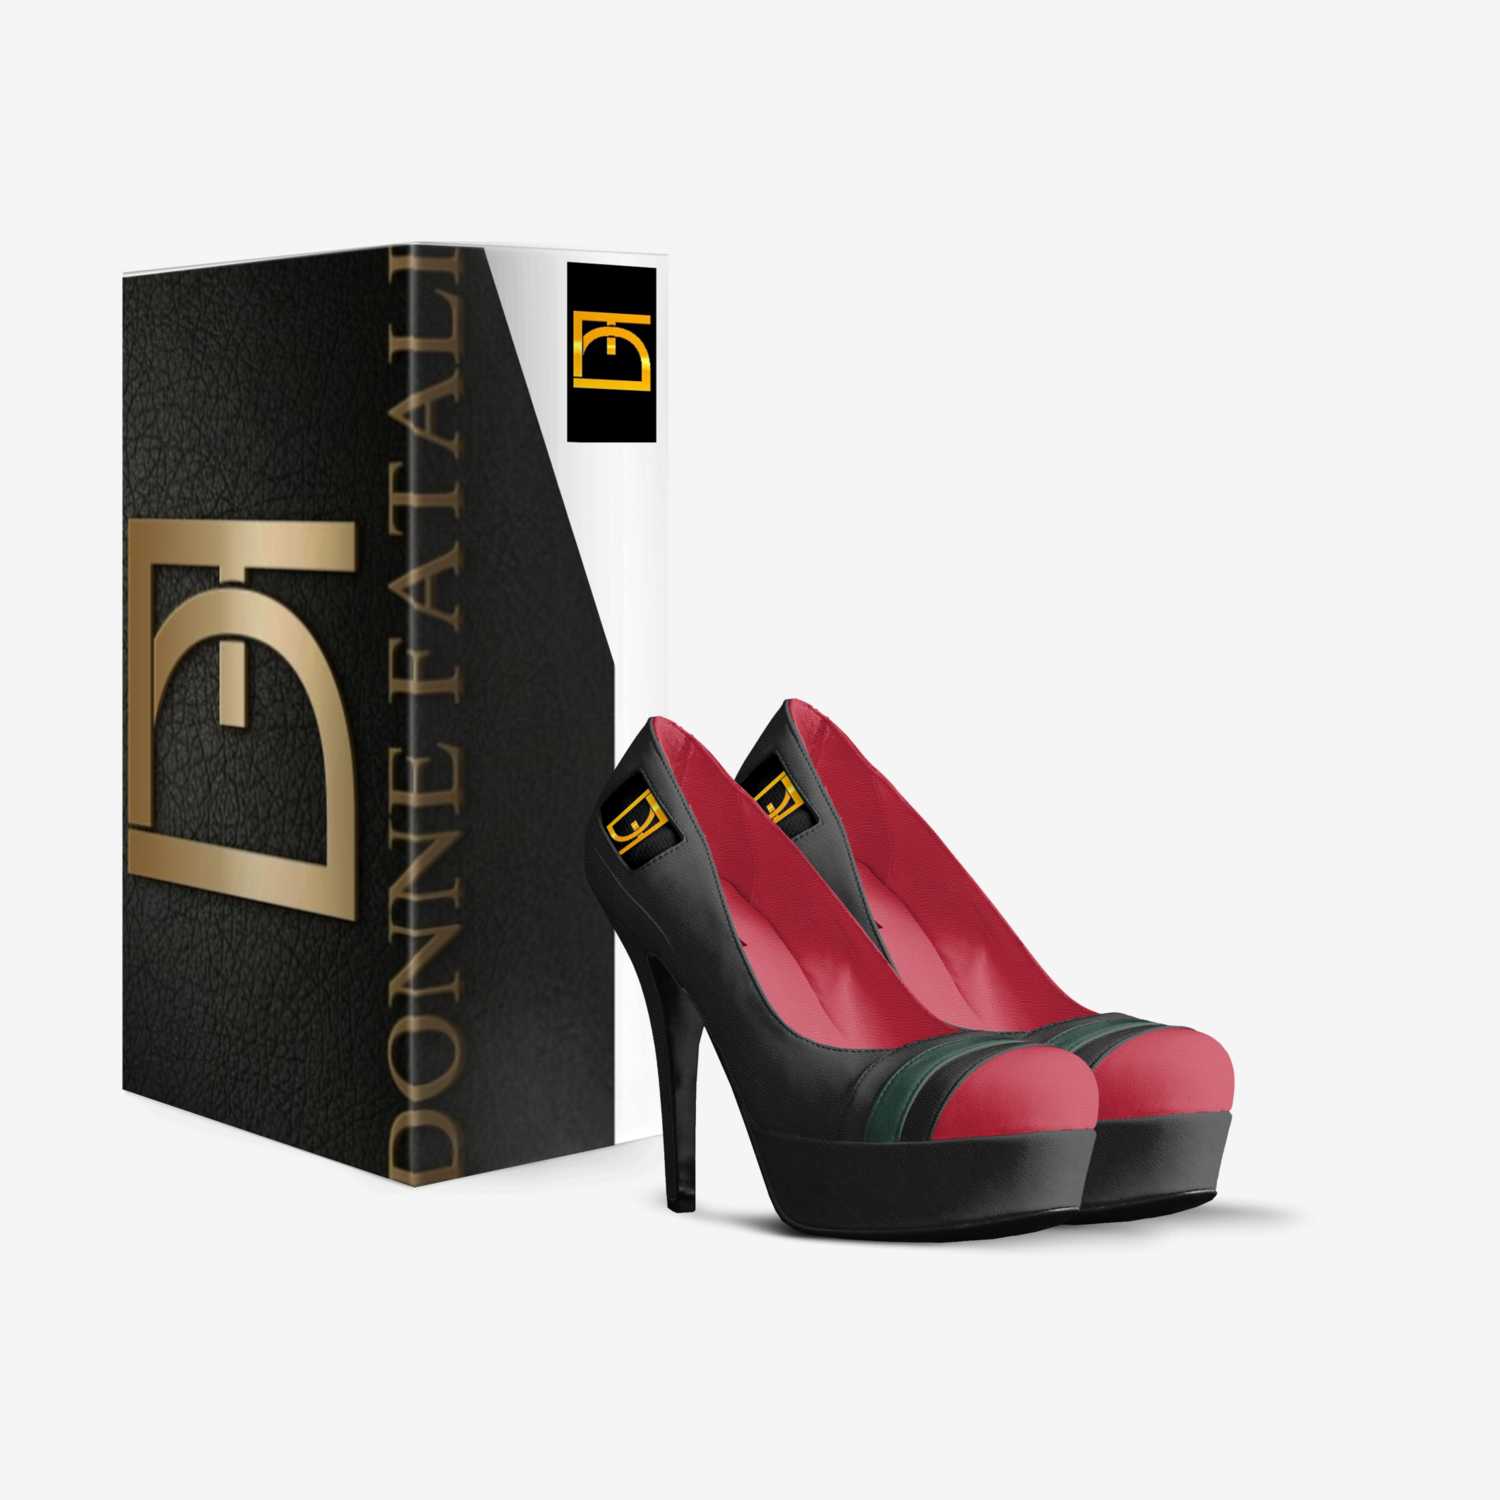 Donne Fatali custom made in Italy shoes by Luisa Gibbs | Box view